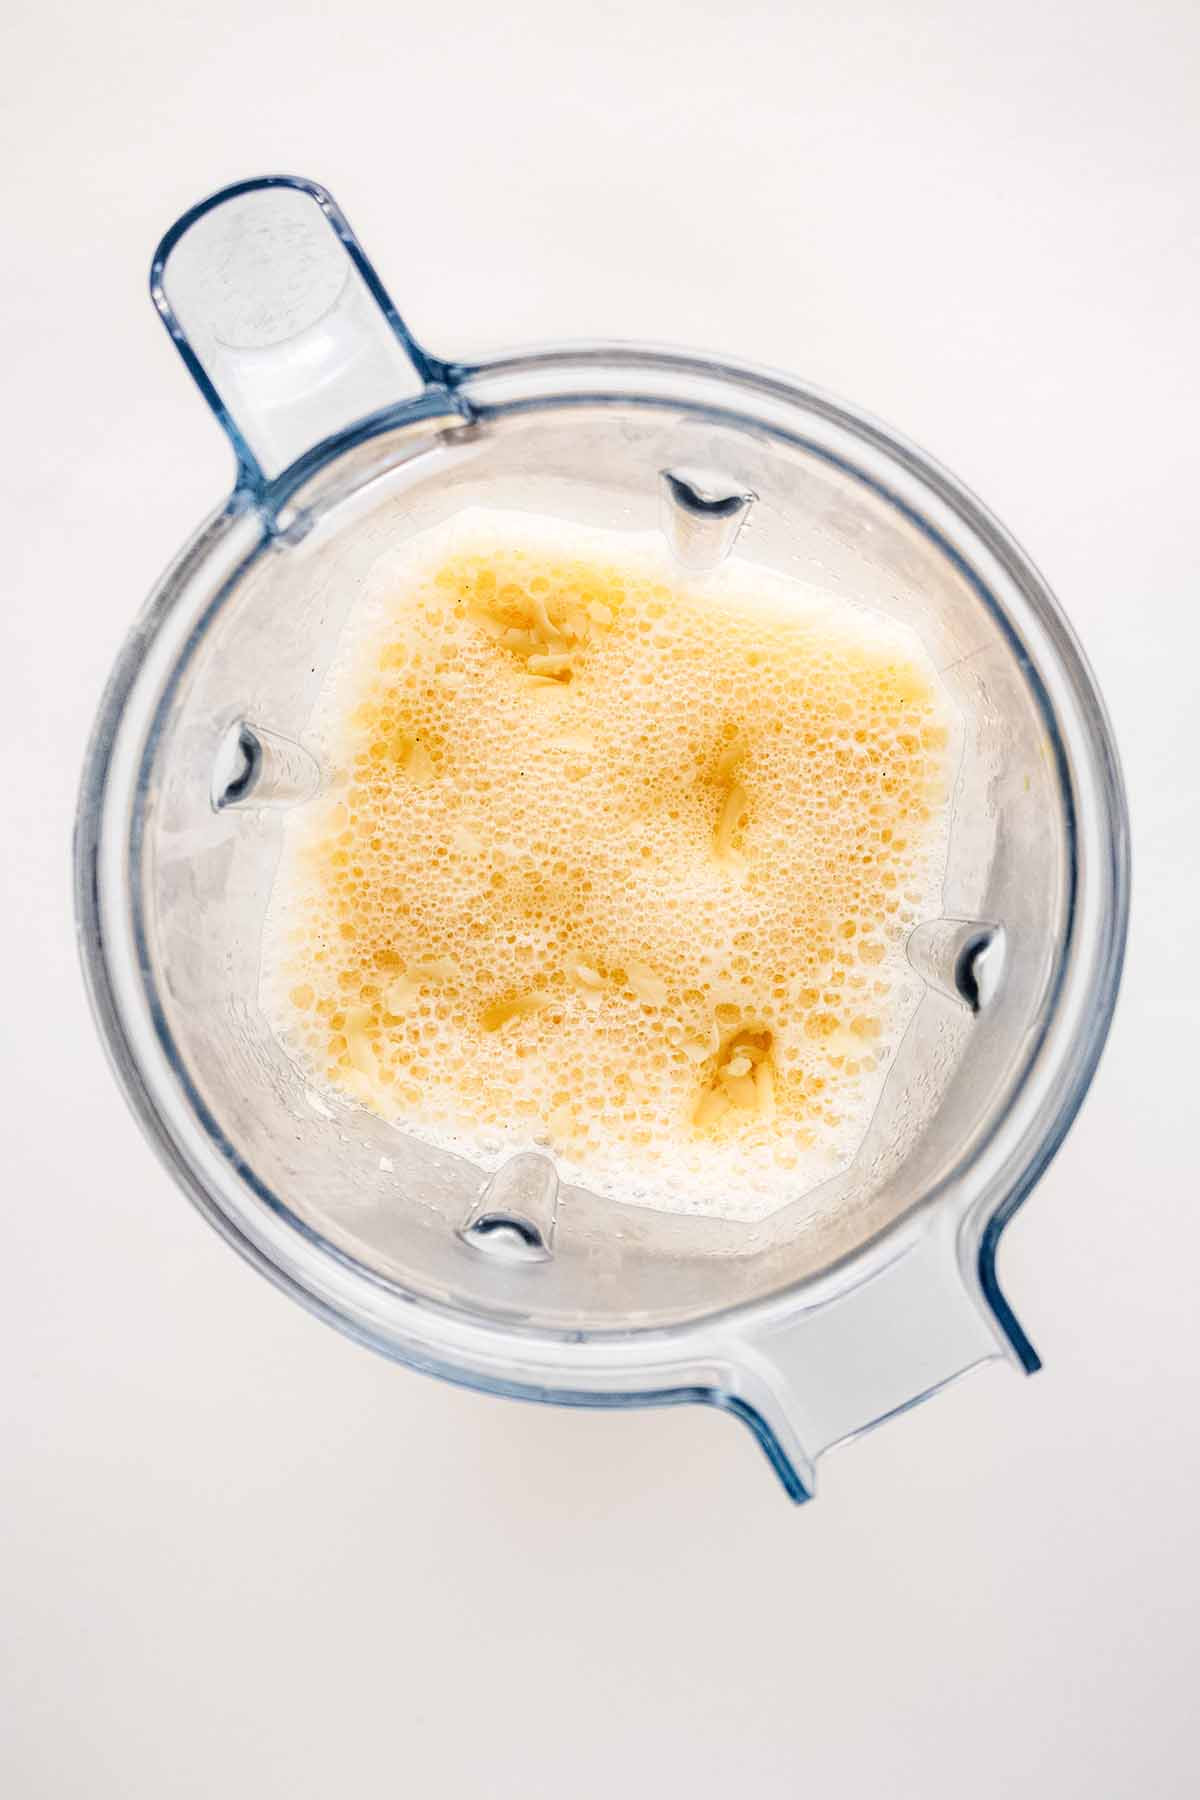 Overhead view of blended ingredients and grated Swiss cheese in a blender.